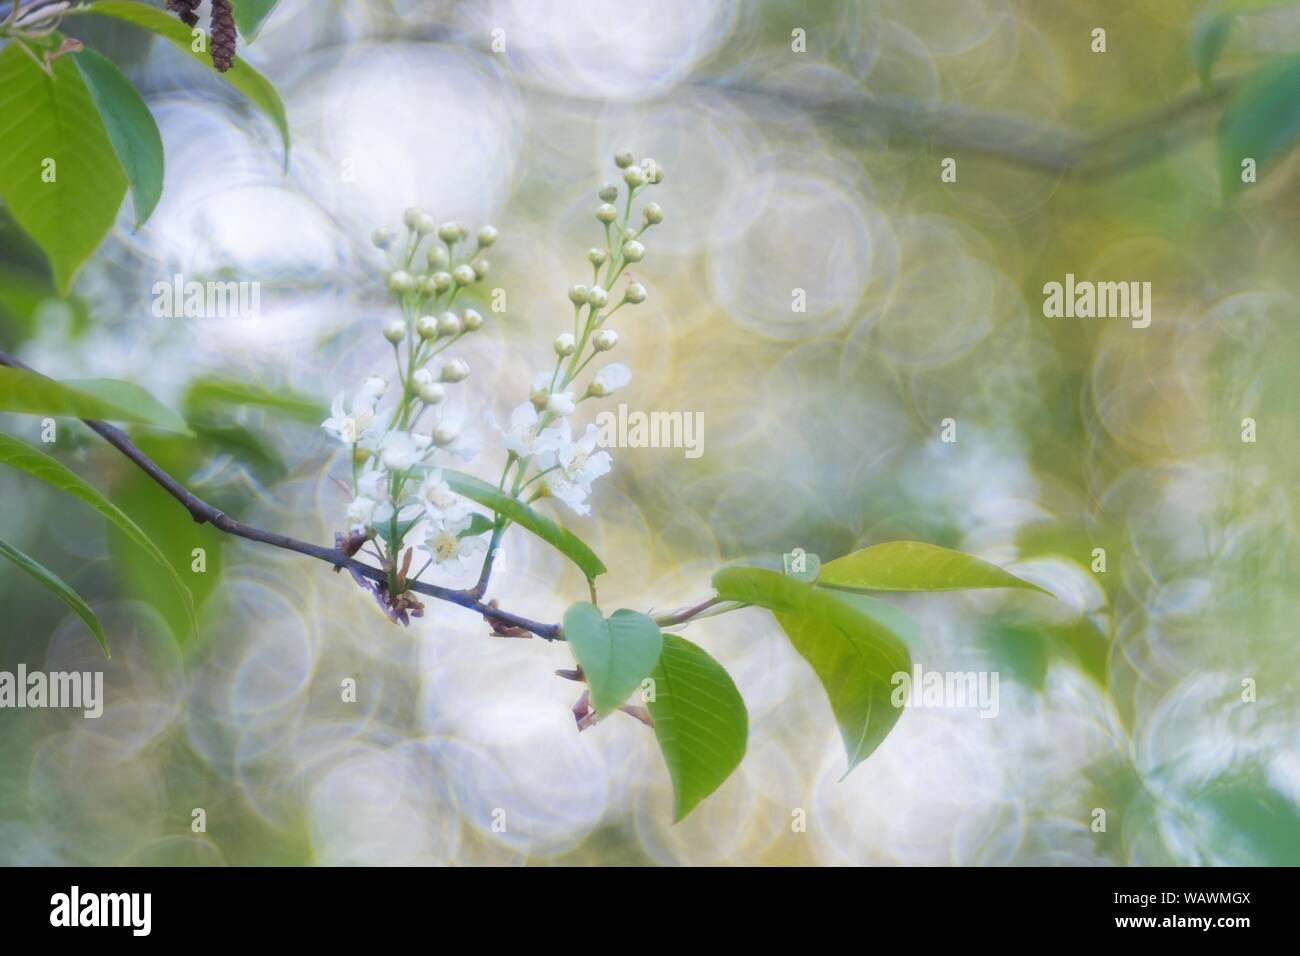 Branch of a European Bird Cherry (Prunus padus), light reflexes in the background, biosphere reserve Upper Lusatian heath and pond landscape, Germany Stock Photo